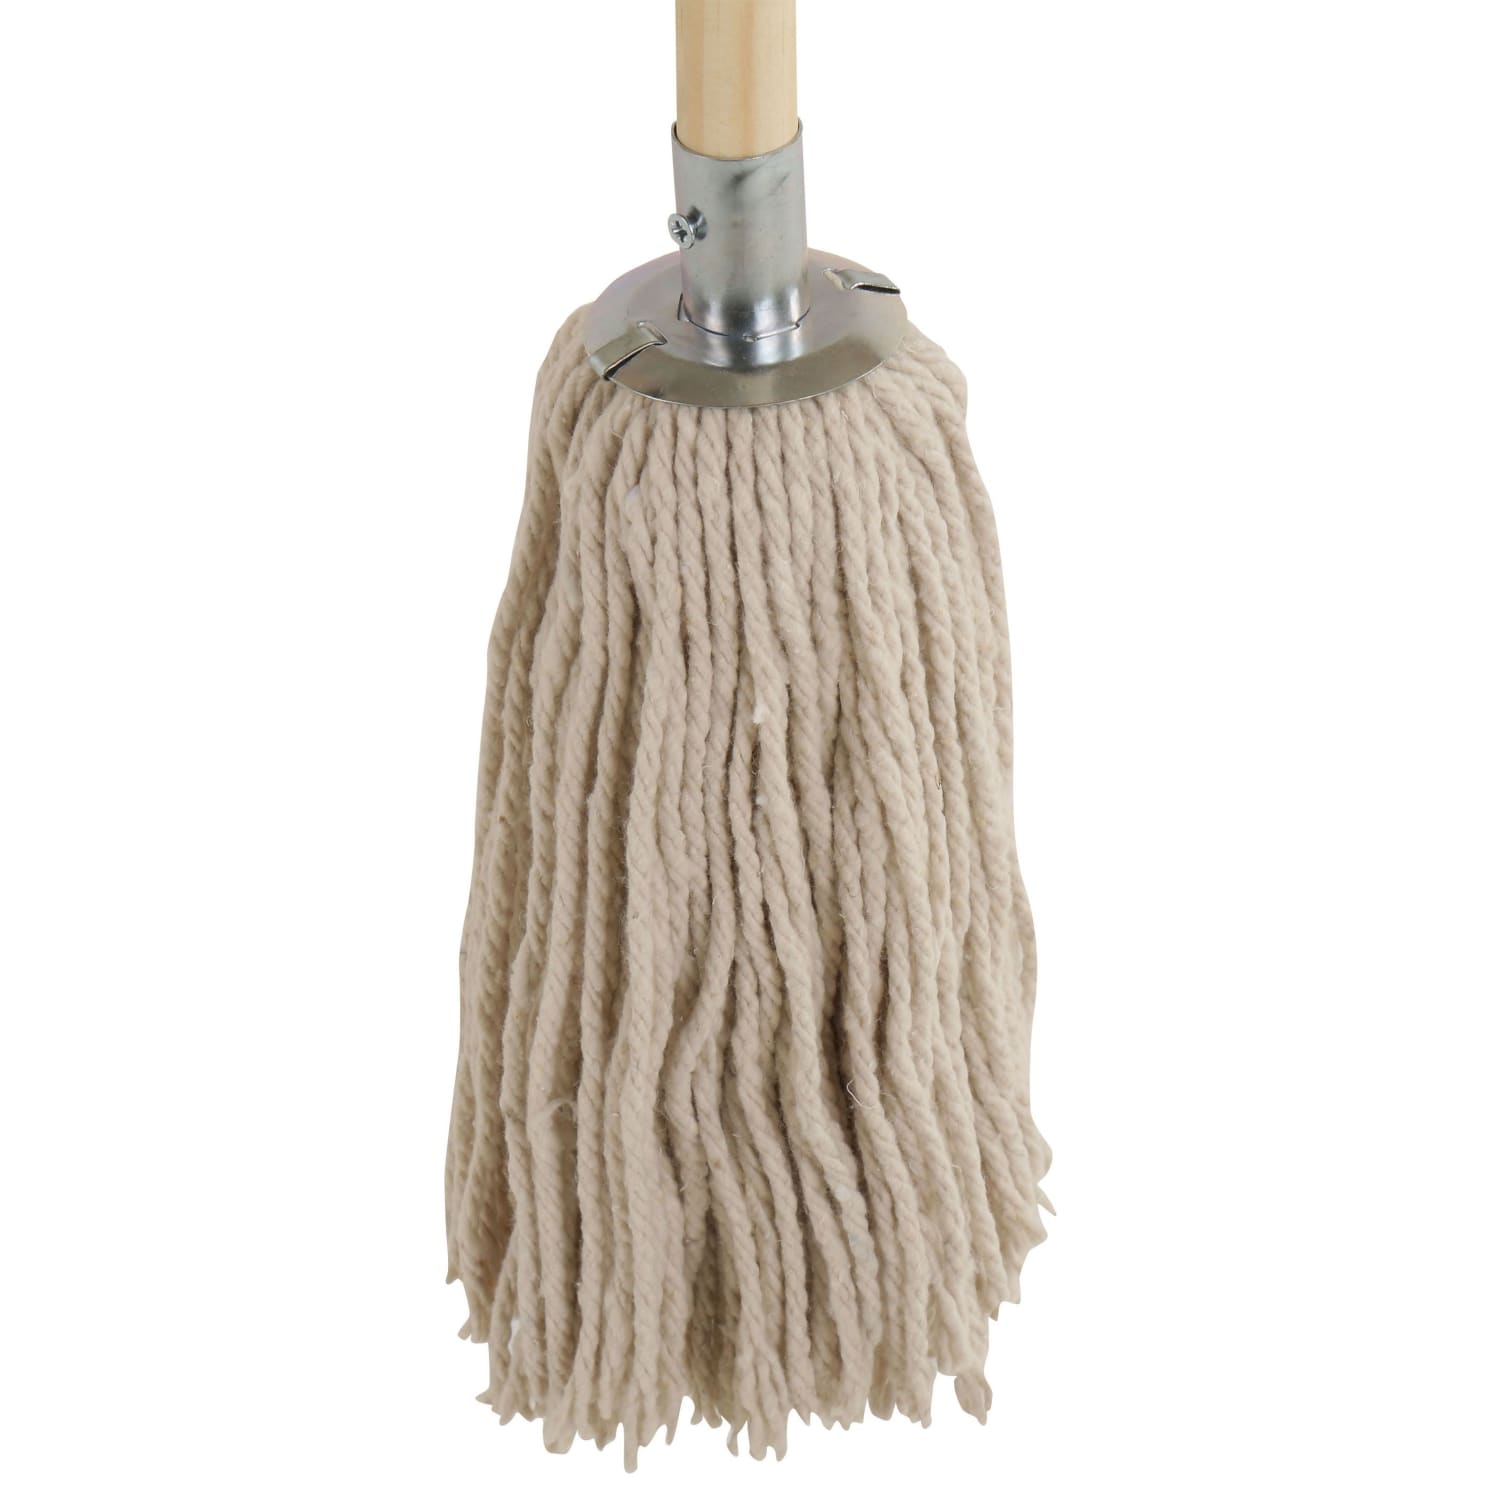 Bulldozer Cotton Mop with Wooden Handle